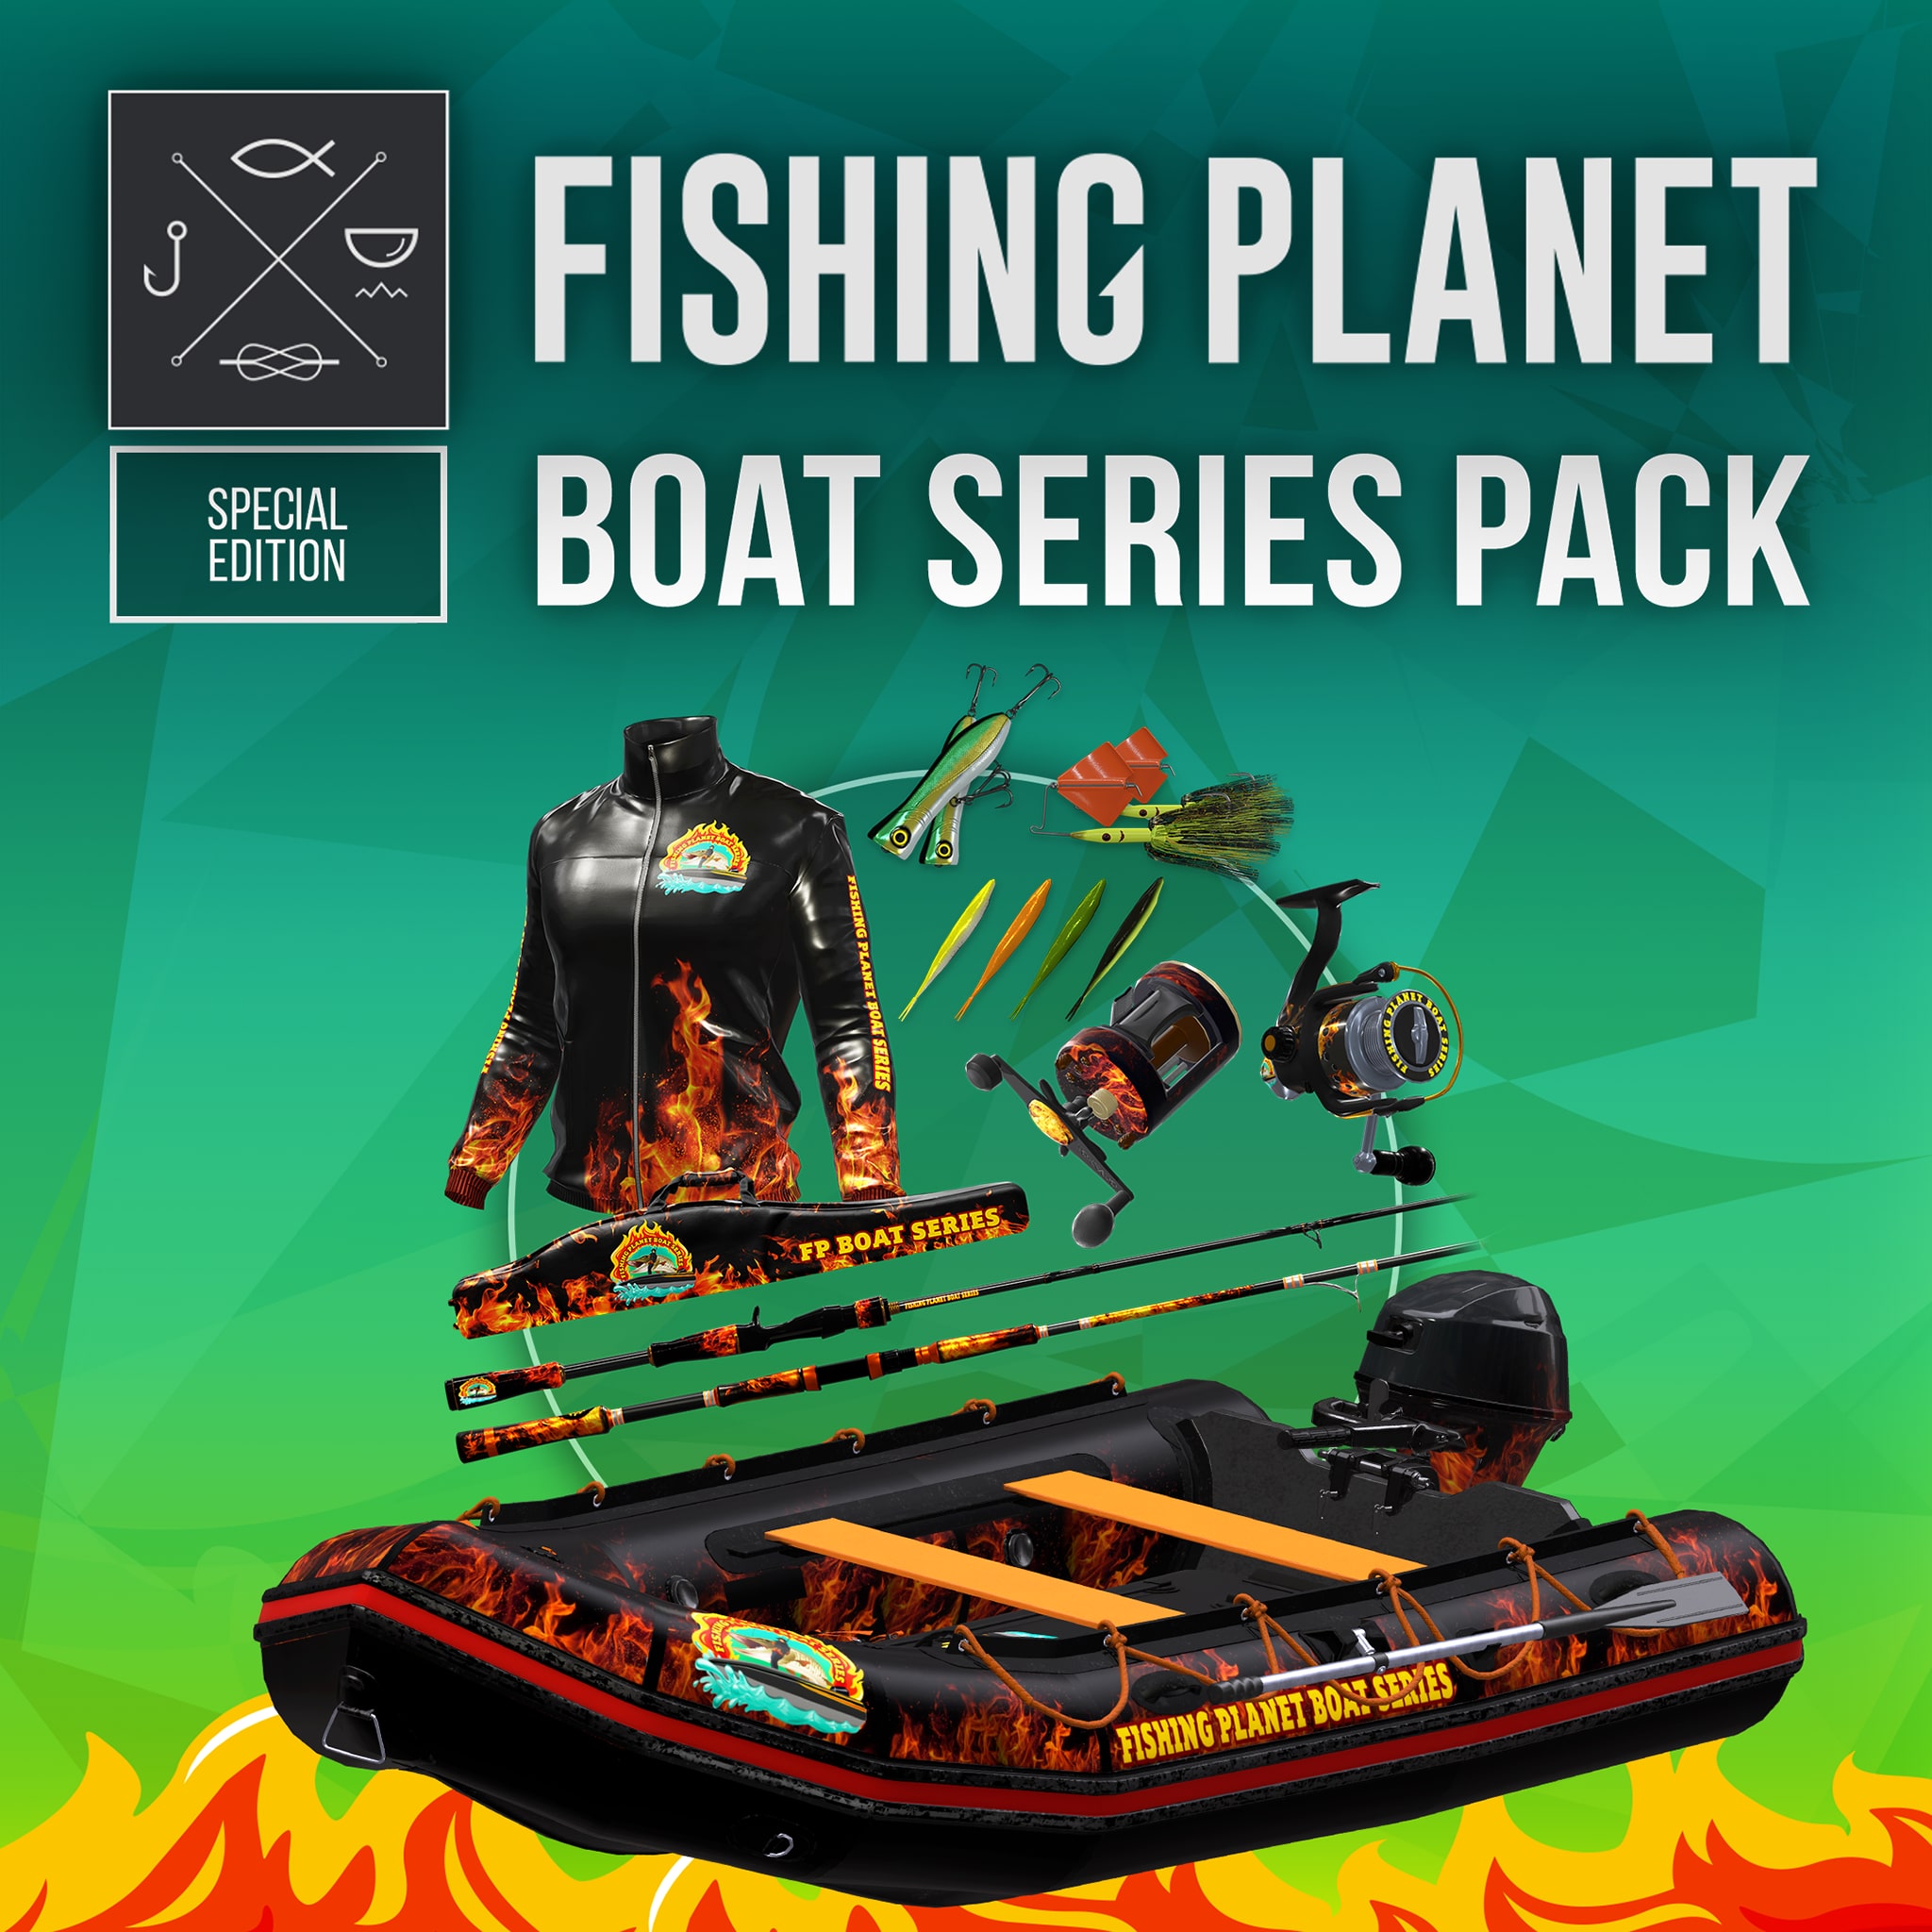 is there a 2 person capacity boat fishing planet